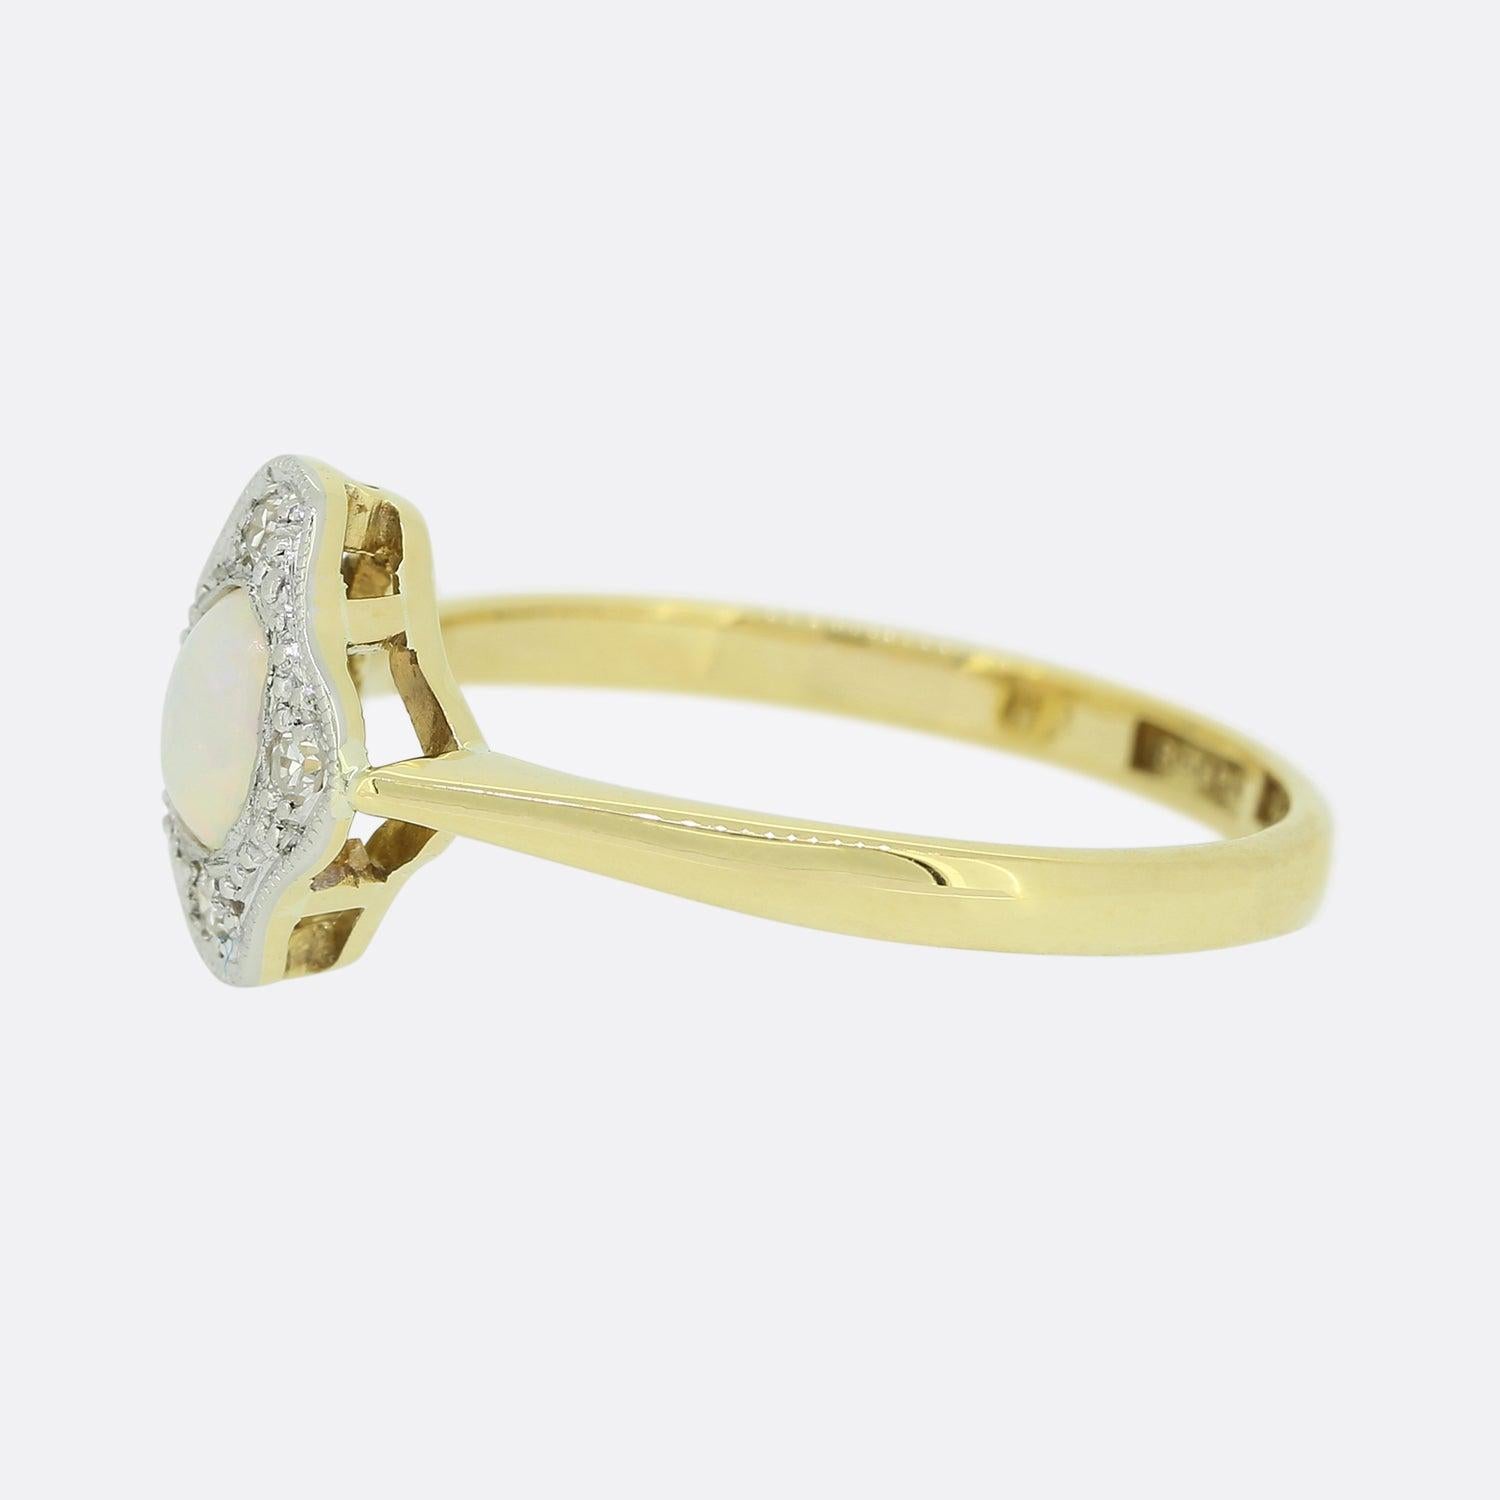 This is an 18ct yellow gold opal and diamond ring. The centralised white opal possesses a lovely iridescent play of colour and is set in the middle of four single cut diamonds. Each stone here is set in platinum and contained within a milgrain frame